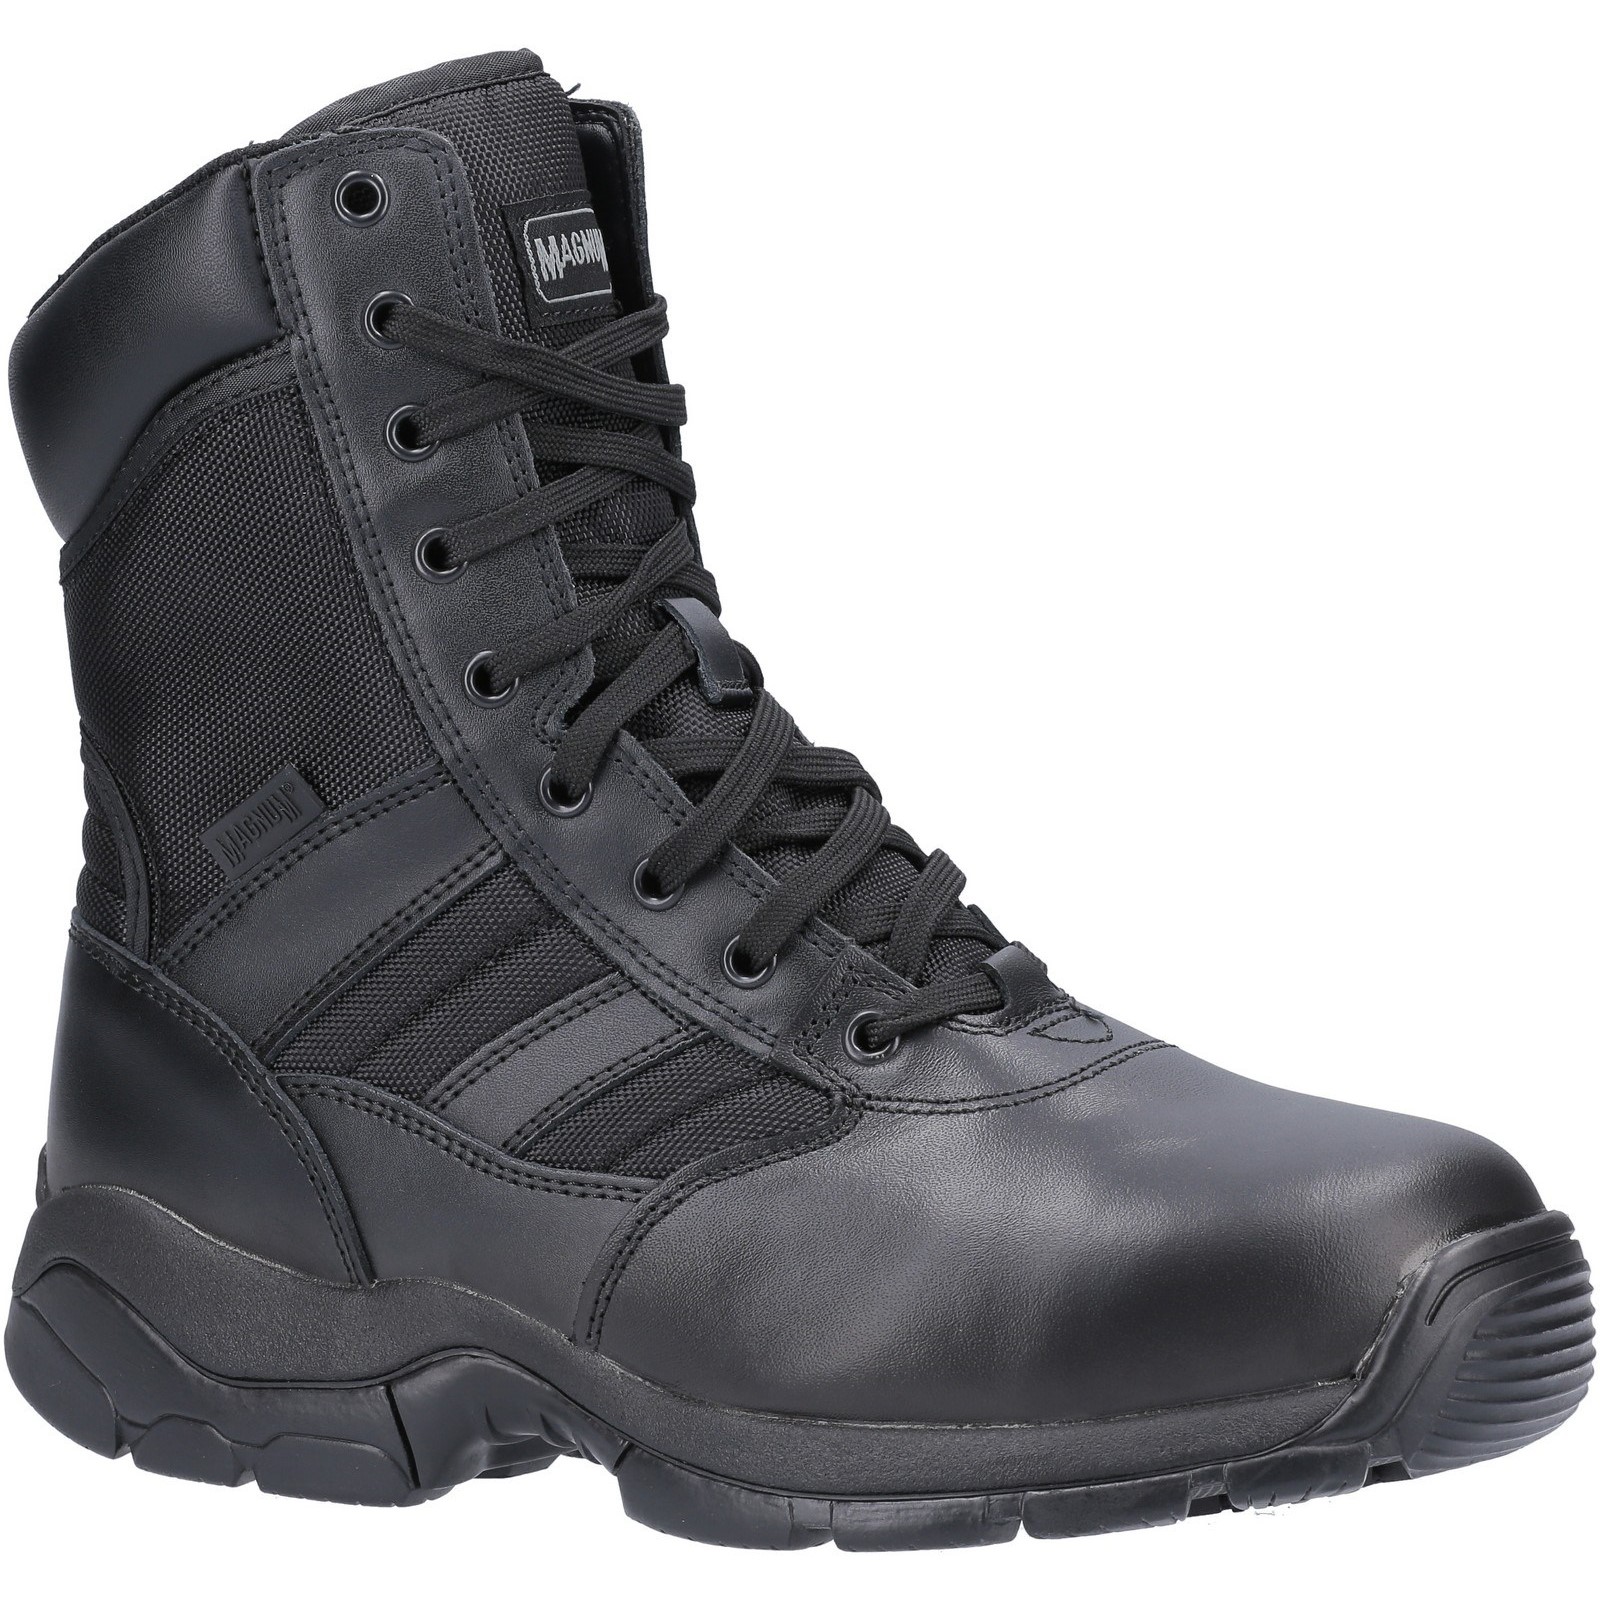 Panther 8.0 Steel Toe Safety Boots